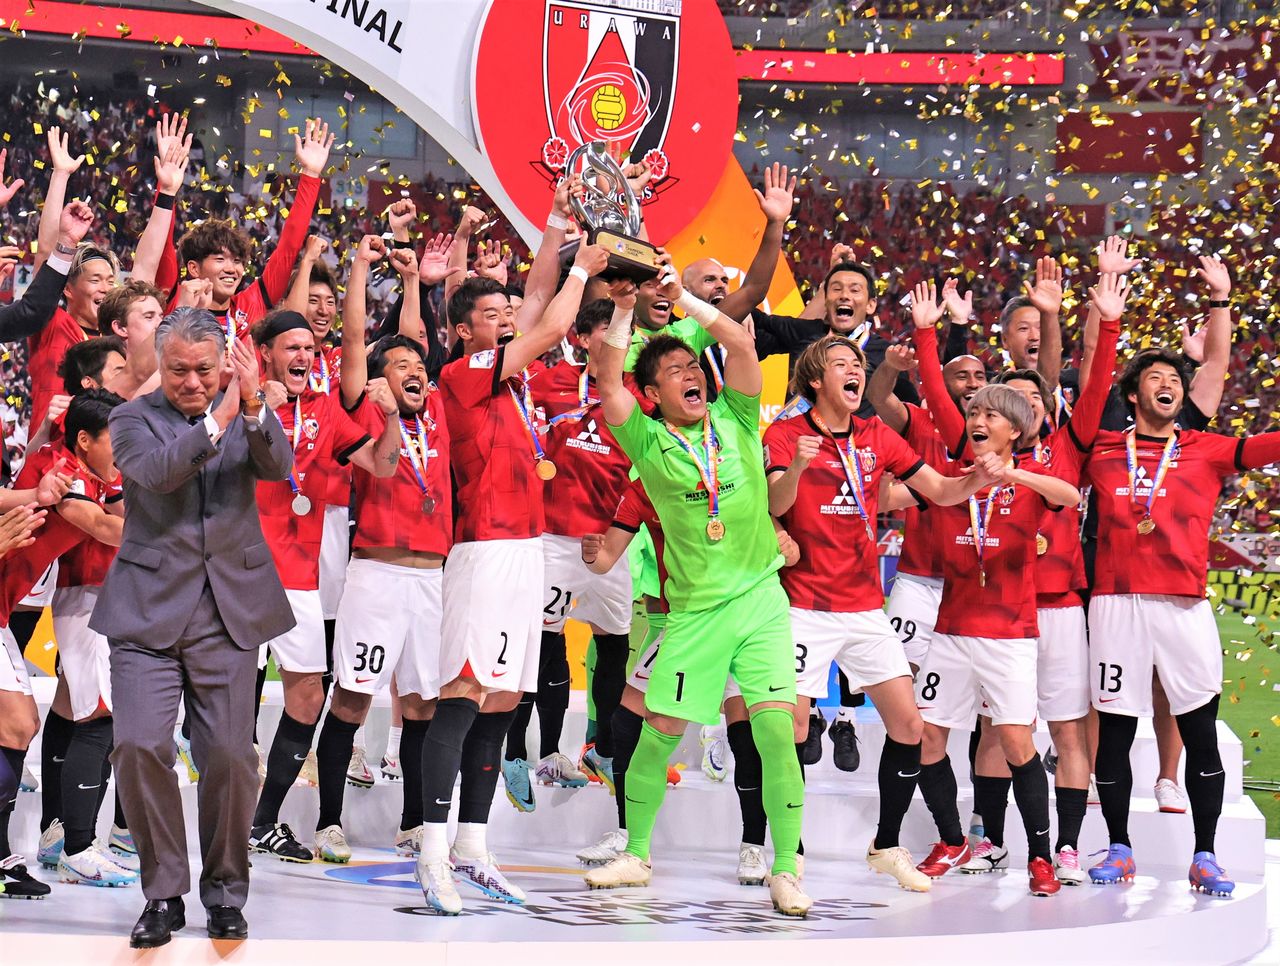 The Urawa Red Diamonds lift the ACL trophy at Saitama Stadium on May 6, 2023, adding a third championship to their 2007 and 2017 titles. (© Jiji)